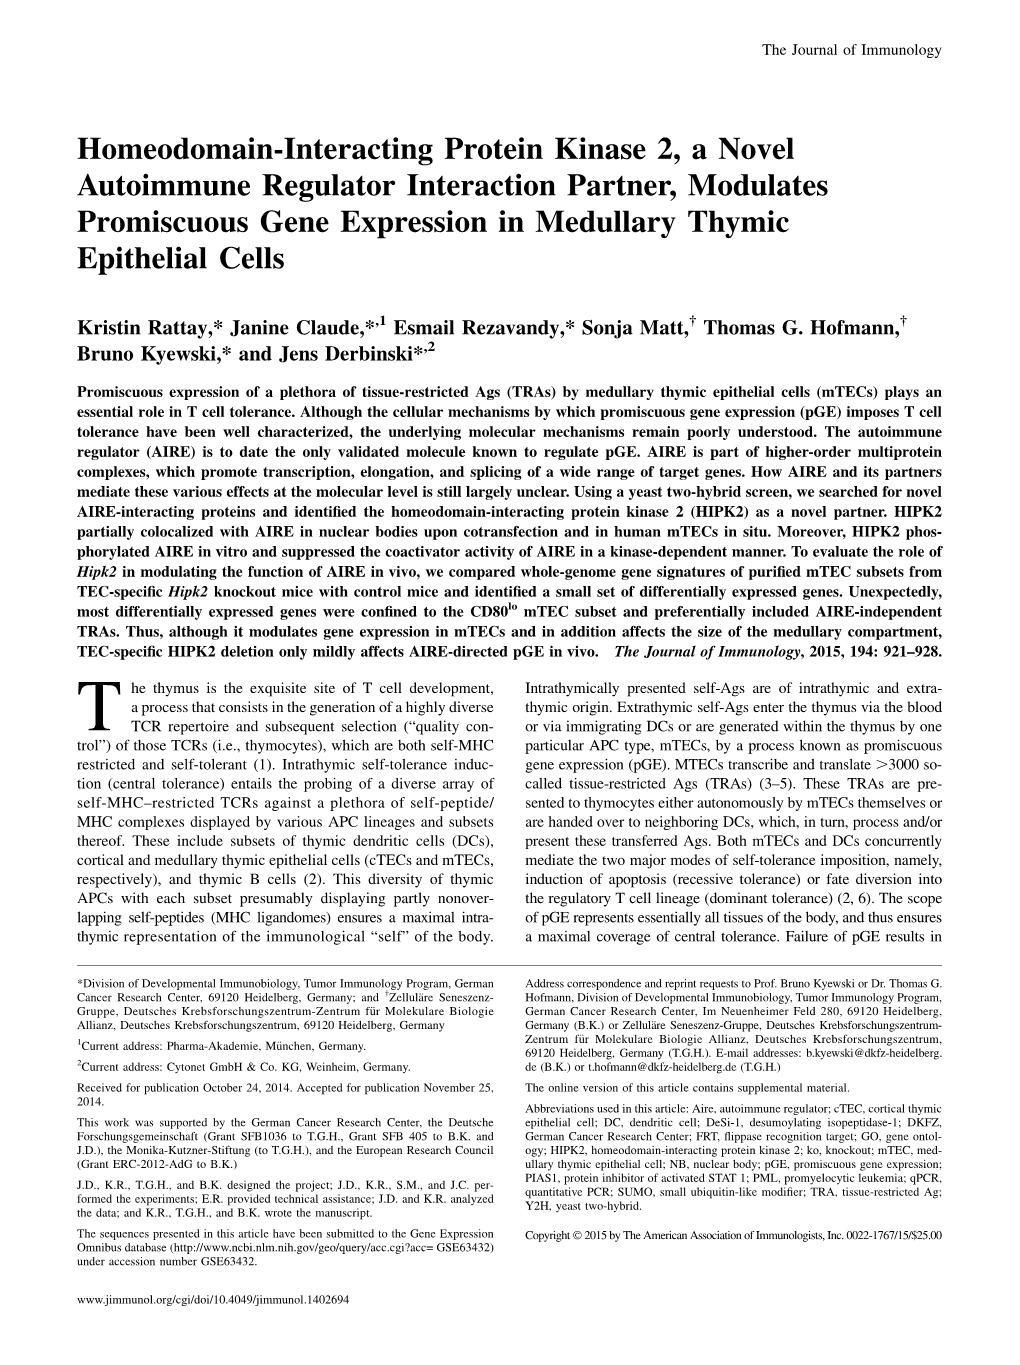 Cells Expression in Medullary Thymic Epithelial Partner, Modulates